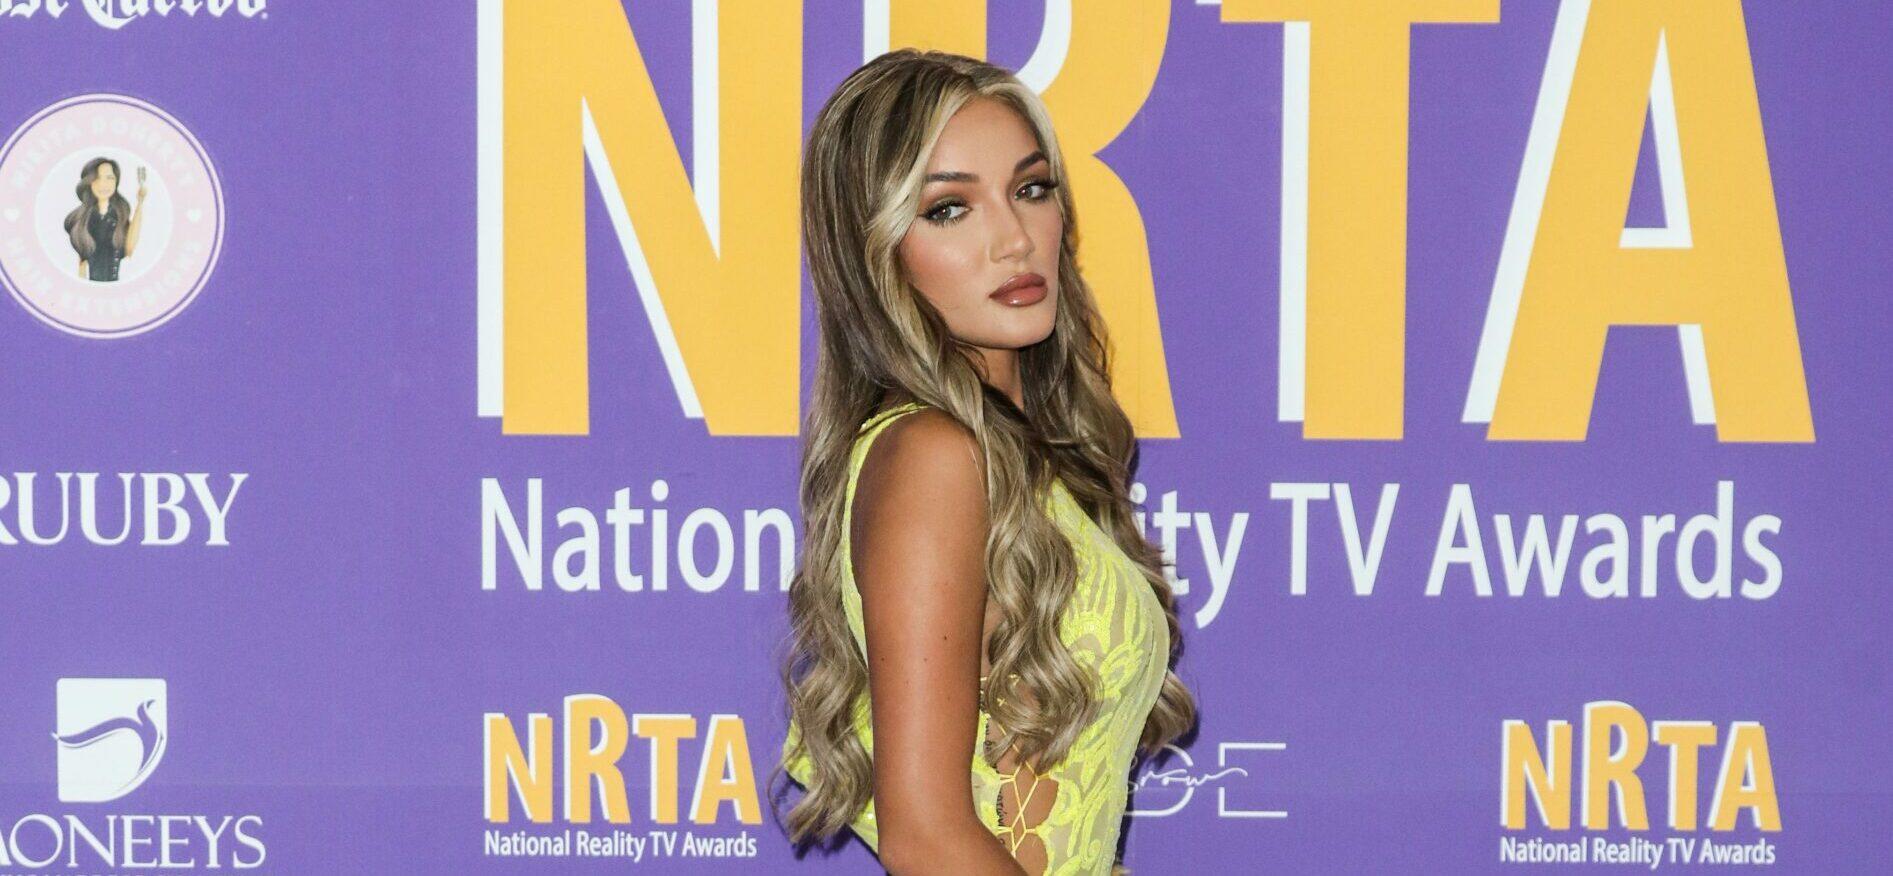 Beaux Raymond at The National Reality TV Awards 2022